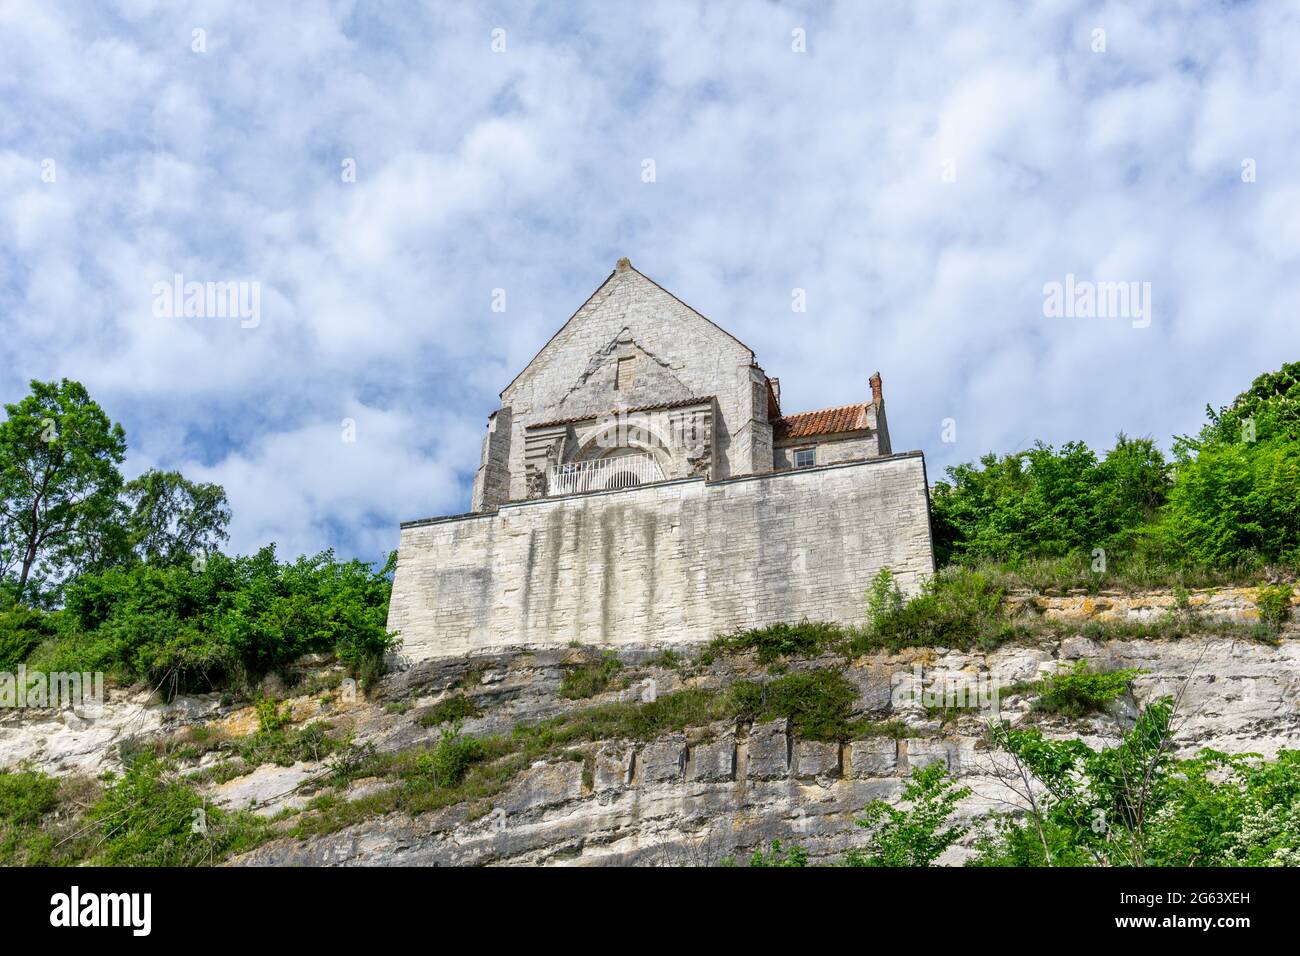 A view of the church at Hojerup on top of the white chalkstone cliffs of Stevns Klint Stock Photo